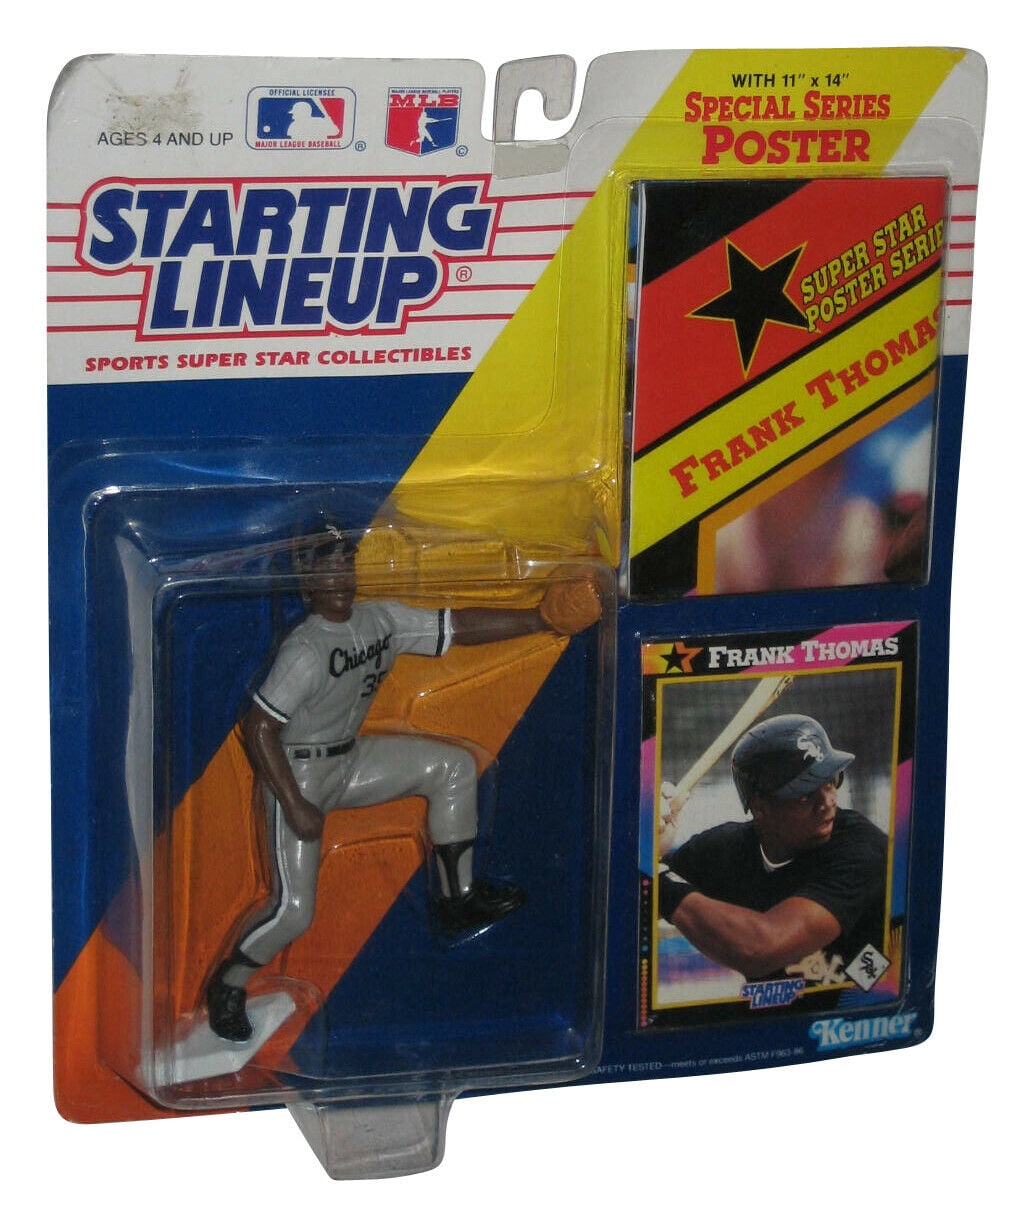 1992 FRANK THOMAS STARTING LINEUP COLLECTIBLE FIGURE 